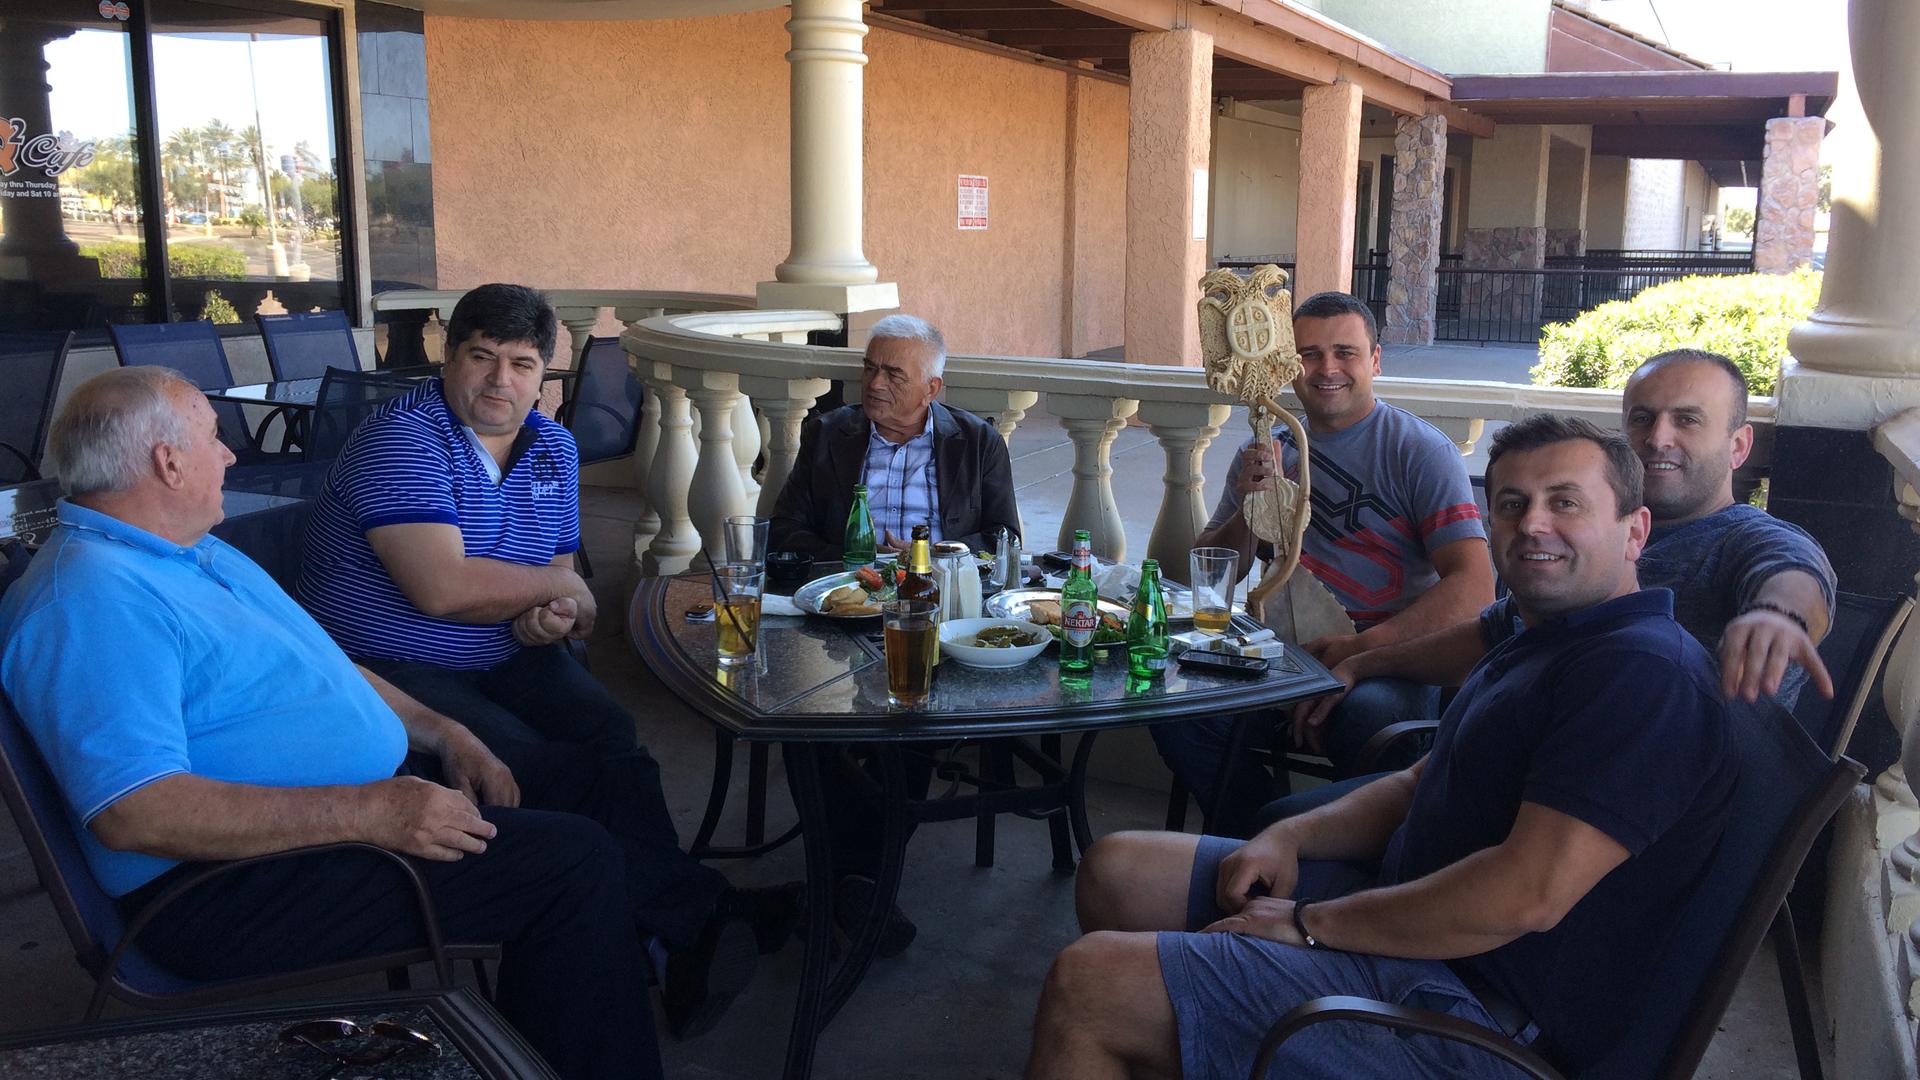 A group of Serbian-speaking men have a leisurely lunch at the Q2 Café in Phoenix. The café, run by a Bosnian Serb refugee, aims to attract patrons from all parts of the former Yugoslavia.